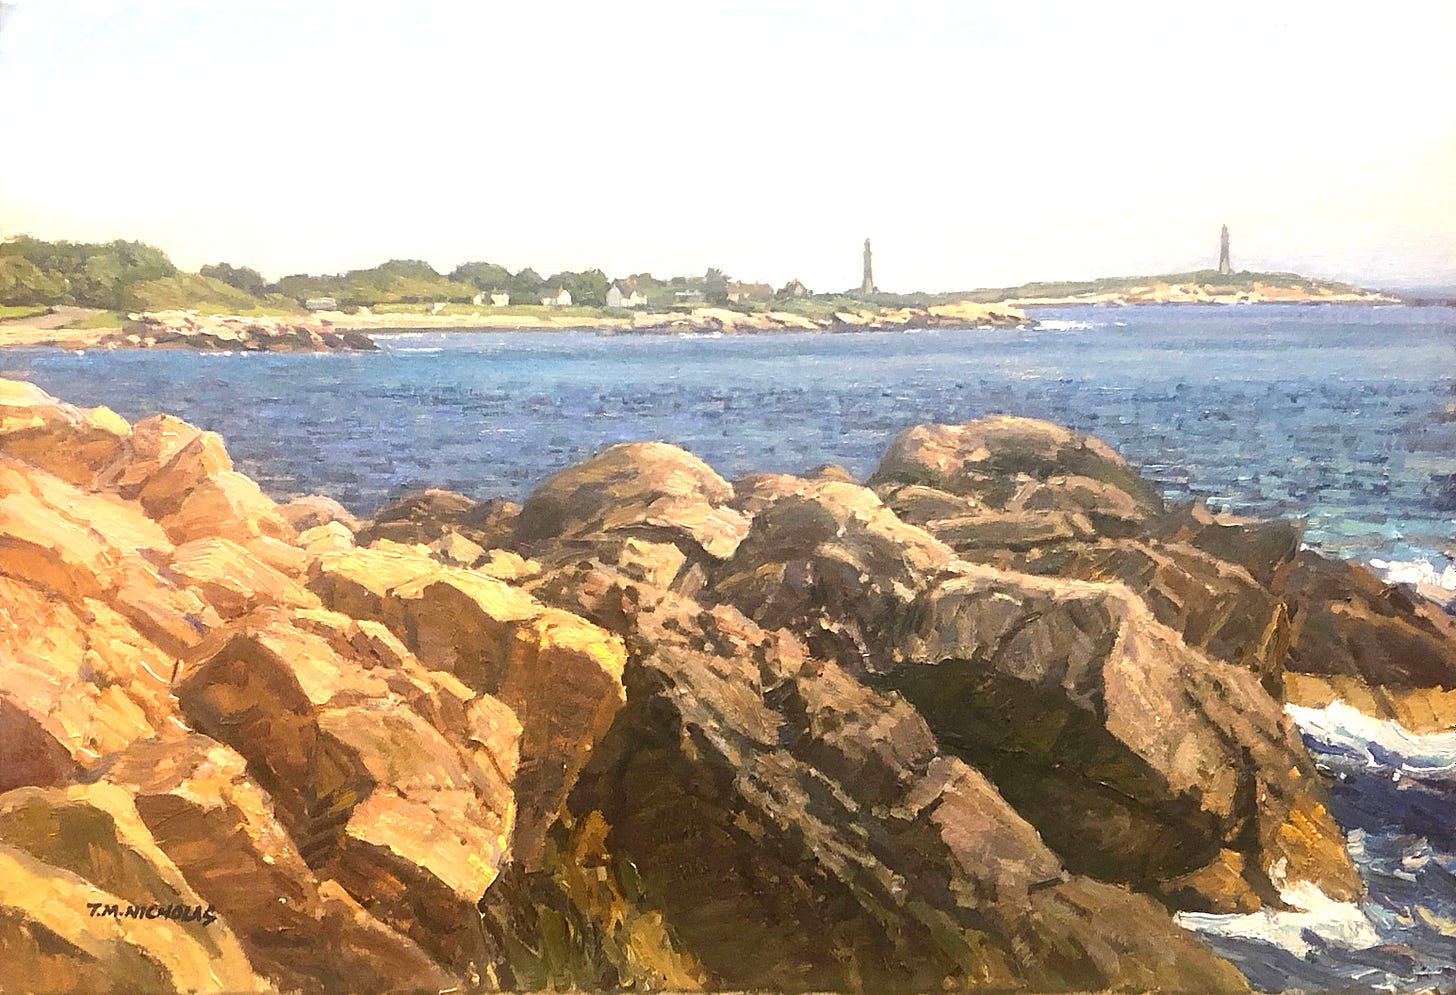 A rocky beach with a body of water in the background

Description automatically generated with low confidence